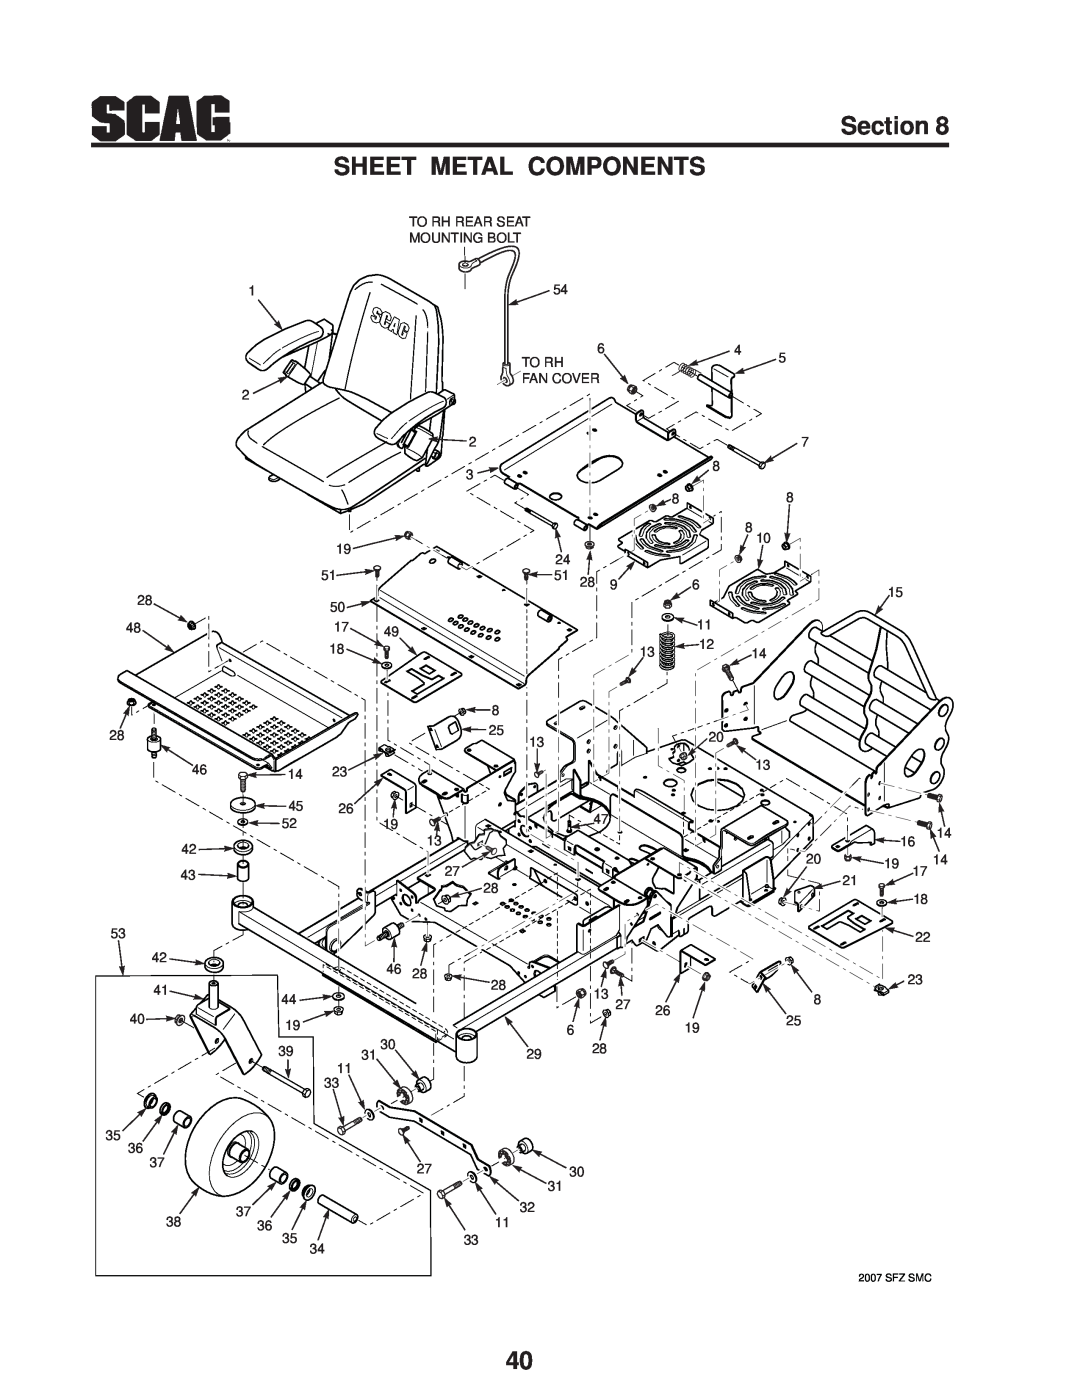 Scag Power Equipment SFZ manual Section SHEET METAL COMPONENTS, To Rh Rear Seat Mounting Bolt, Fan Cover, Sfz Smc 